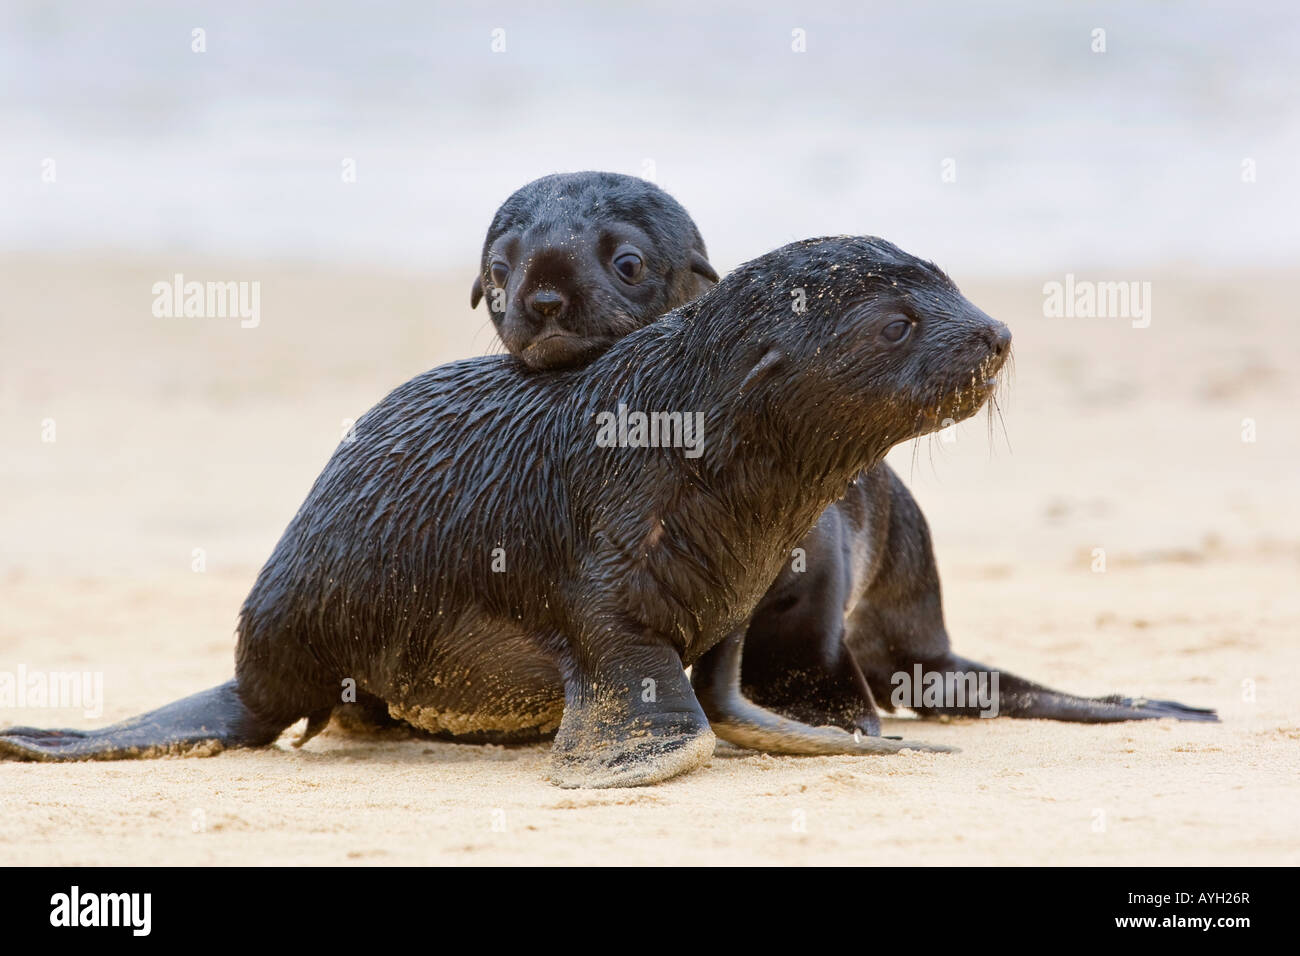 Baby South African Fur Seals on sand, Namibia, Africa Stock Photo